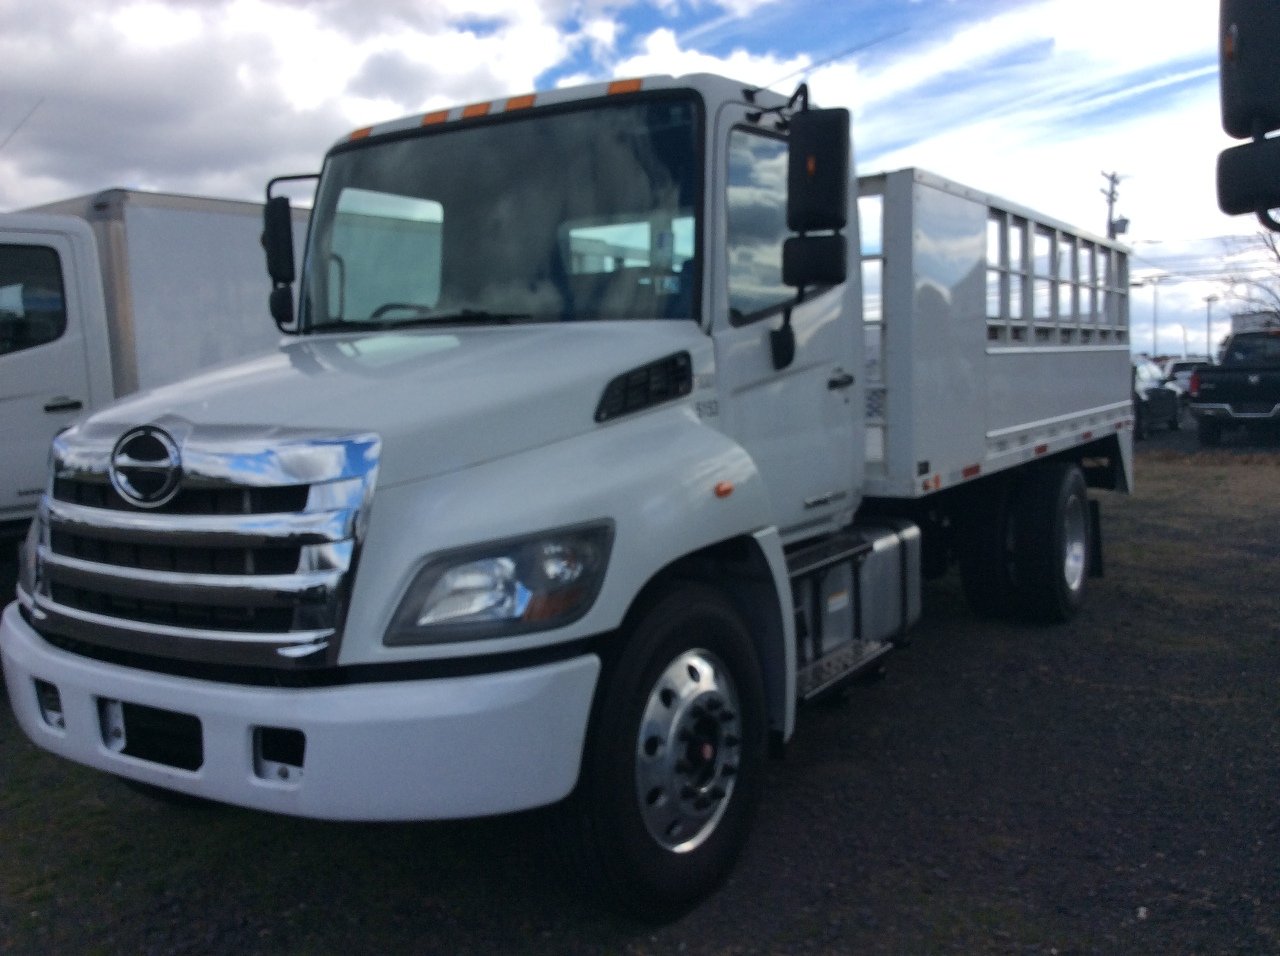 Used Truck Inventory - 1001857 01 2 - 127